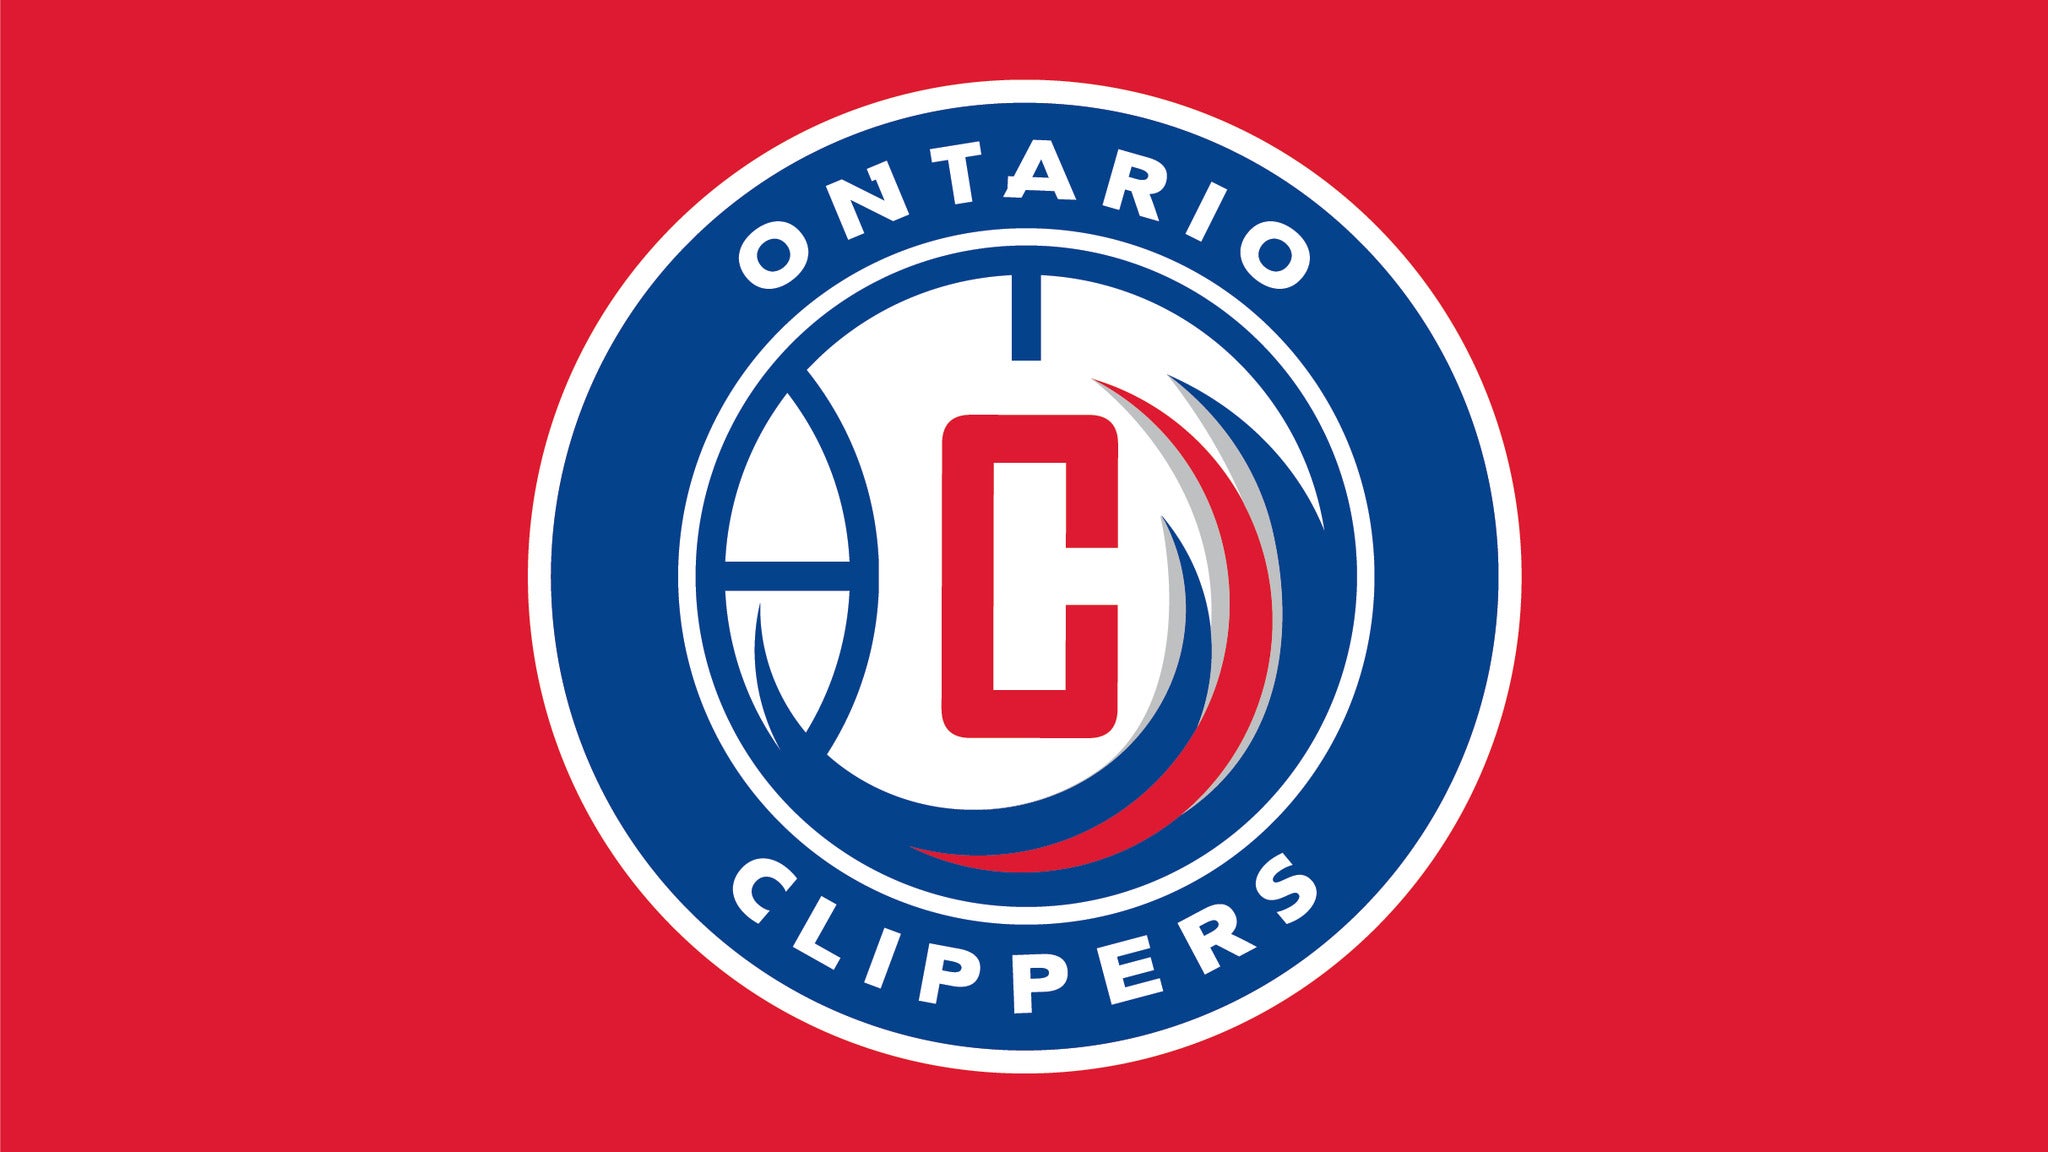 Ontario Clippers vs. Iowa Wolves at Toyota Arena - Ontario, CA 91764